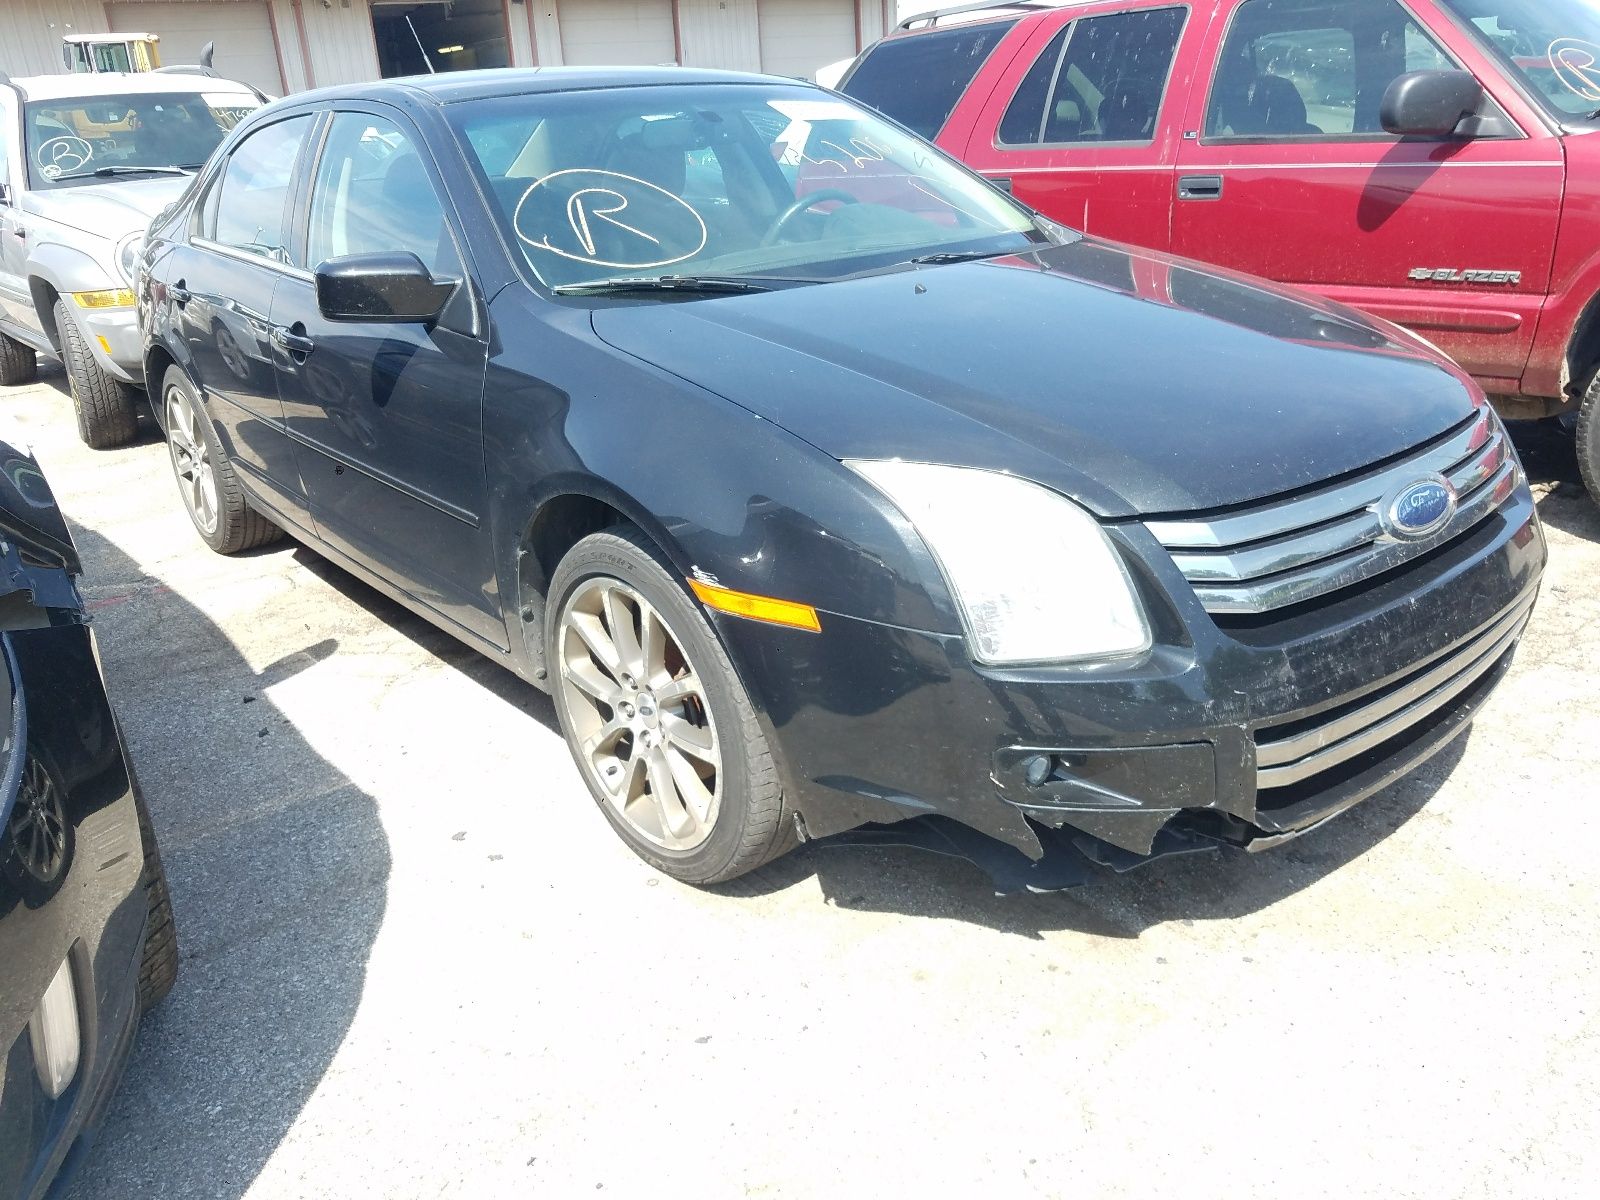 1 of 3FAHP08179R118724 Ford Fusion 2009